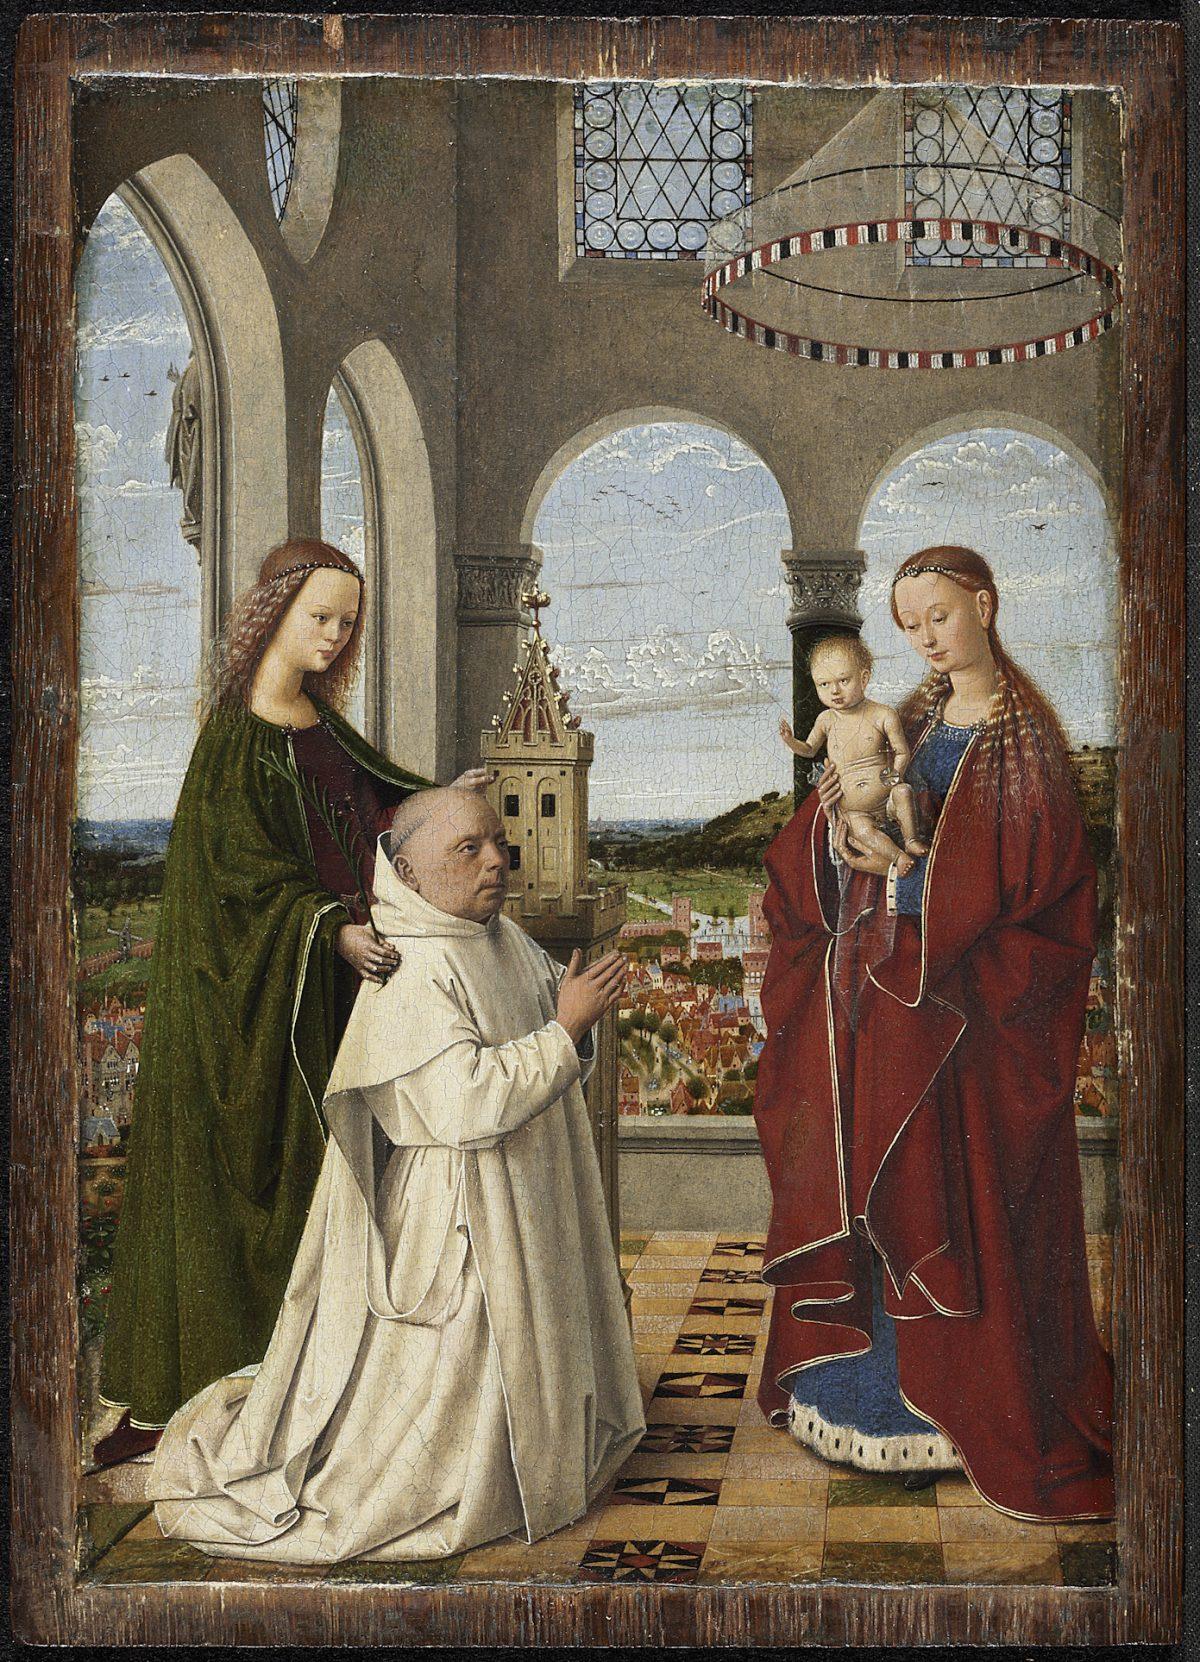 “The Virgin and Child with St. Barbara and Jan Vos," (known as the "Exeter Virgin"), circa 1450, by Petrus Christus. Oil on panel, 7 5/8 inches by 5 ½ inches, Staatliche Museen zu Berlin, Gemäldegalerie. (The Frick Collection)